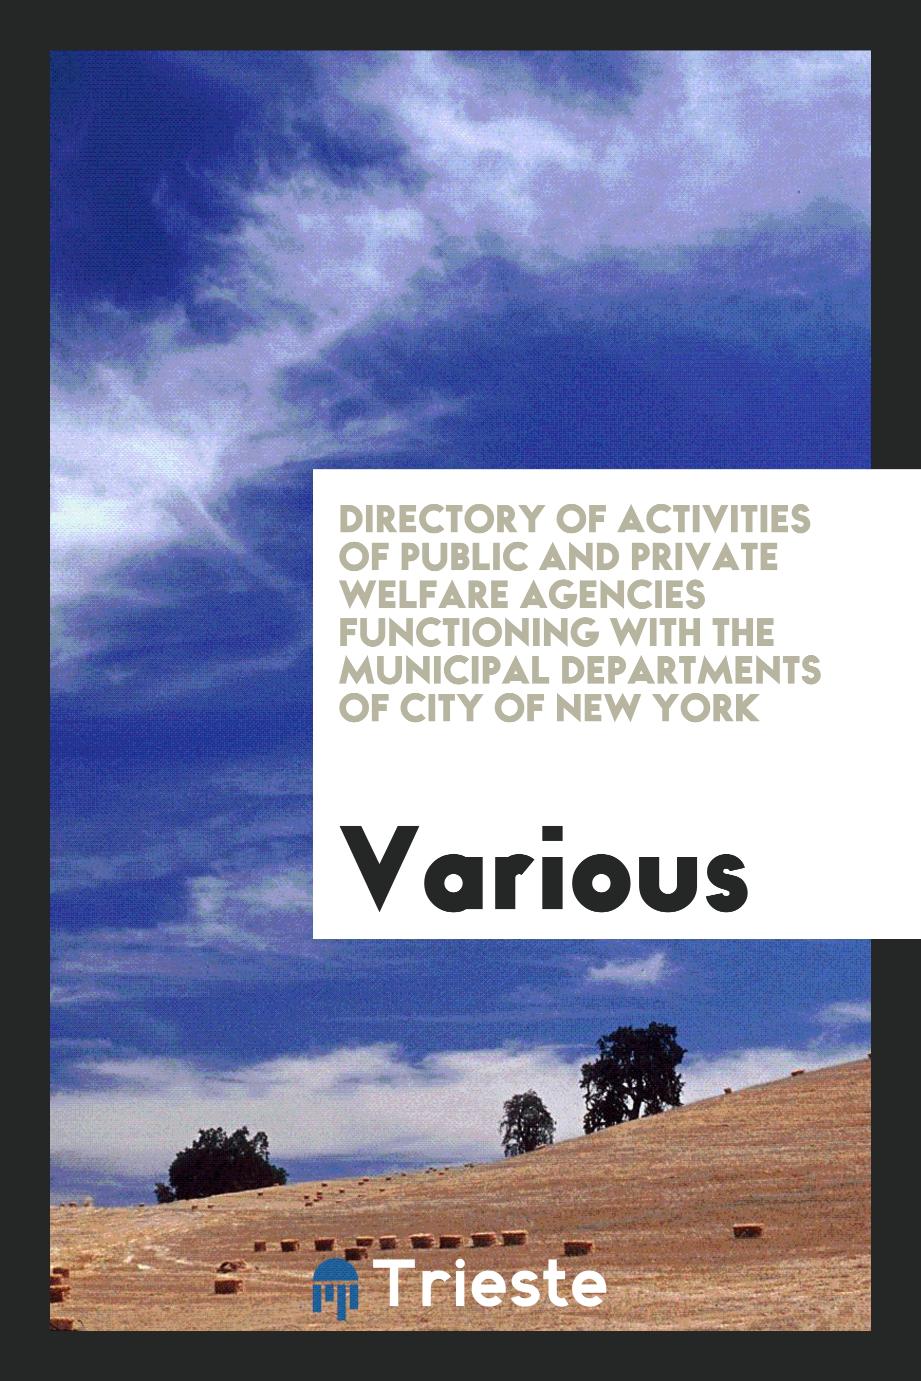 Directory of Activities of Public and Private Welfare Agencies Functioning with the municipal departments of city of New York